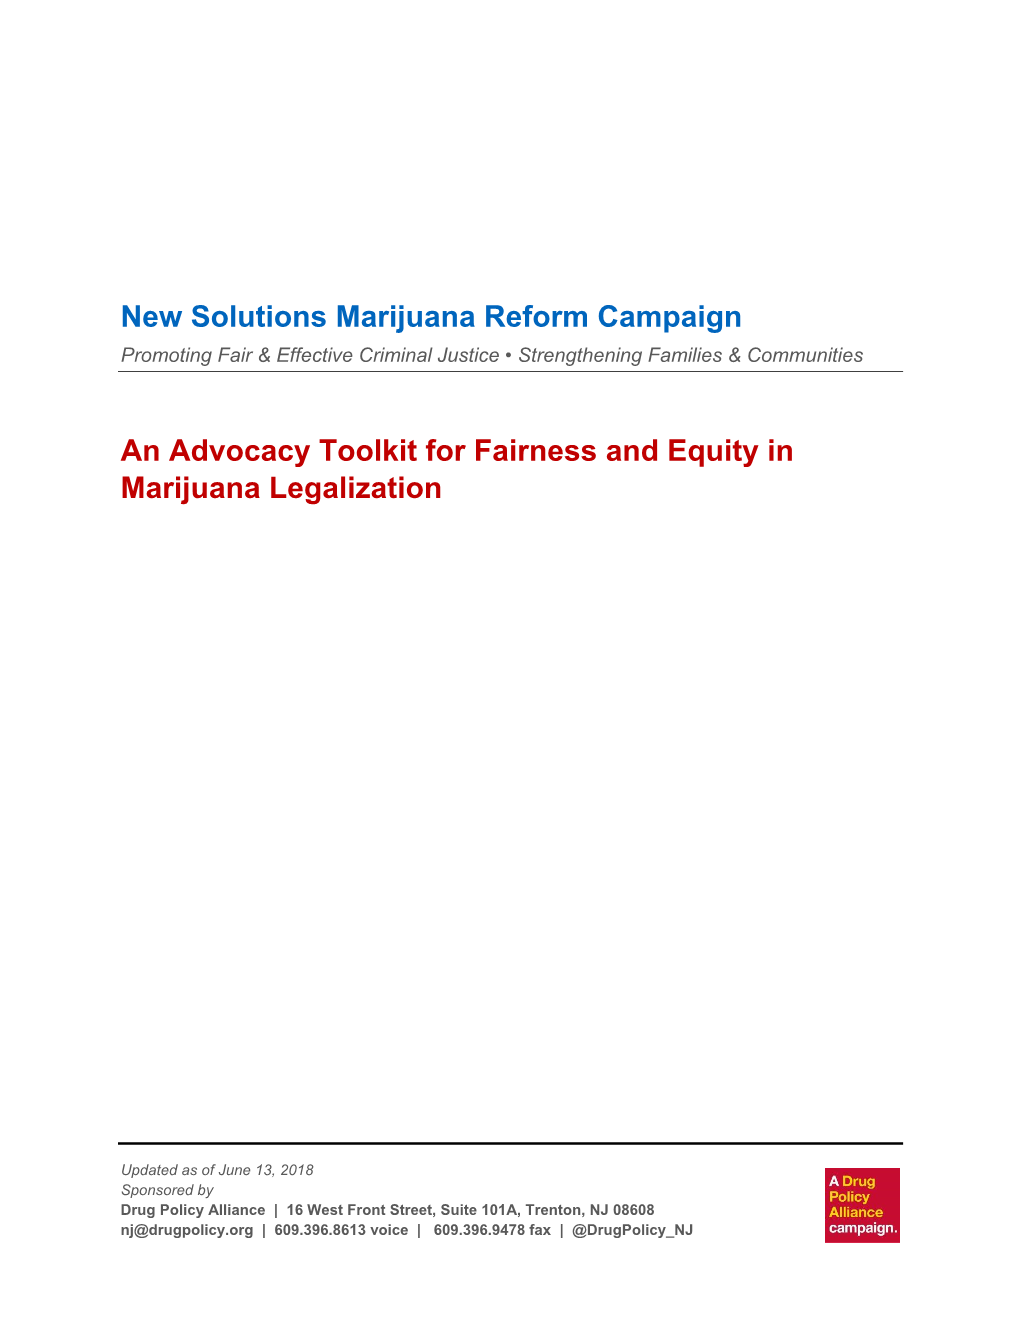 An Advocacy Toolkit for Fairness and Equity in Marijuana Legalization